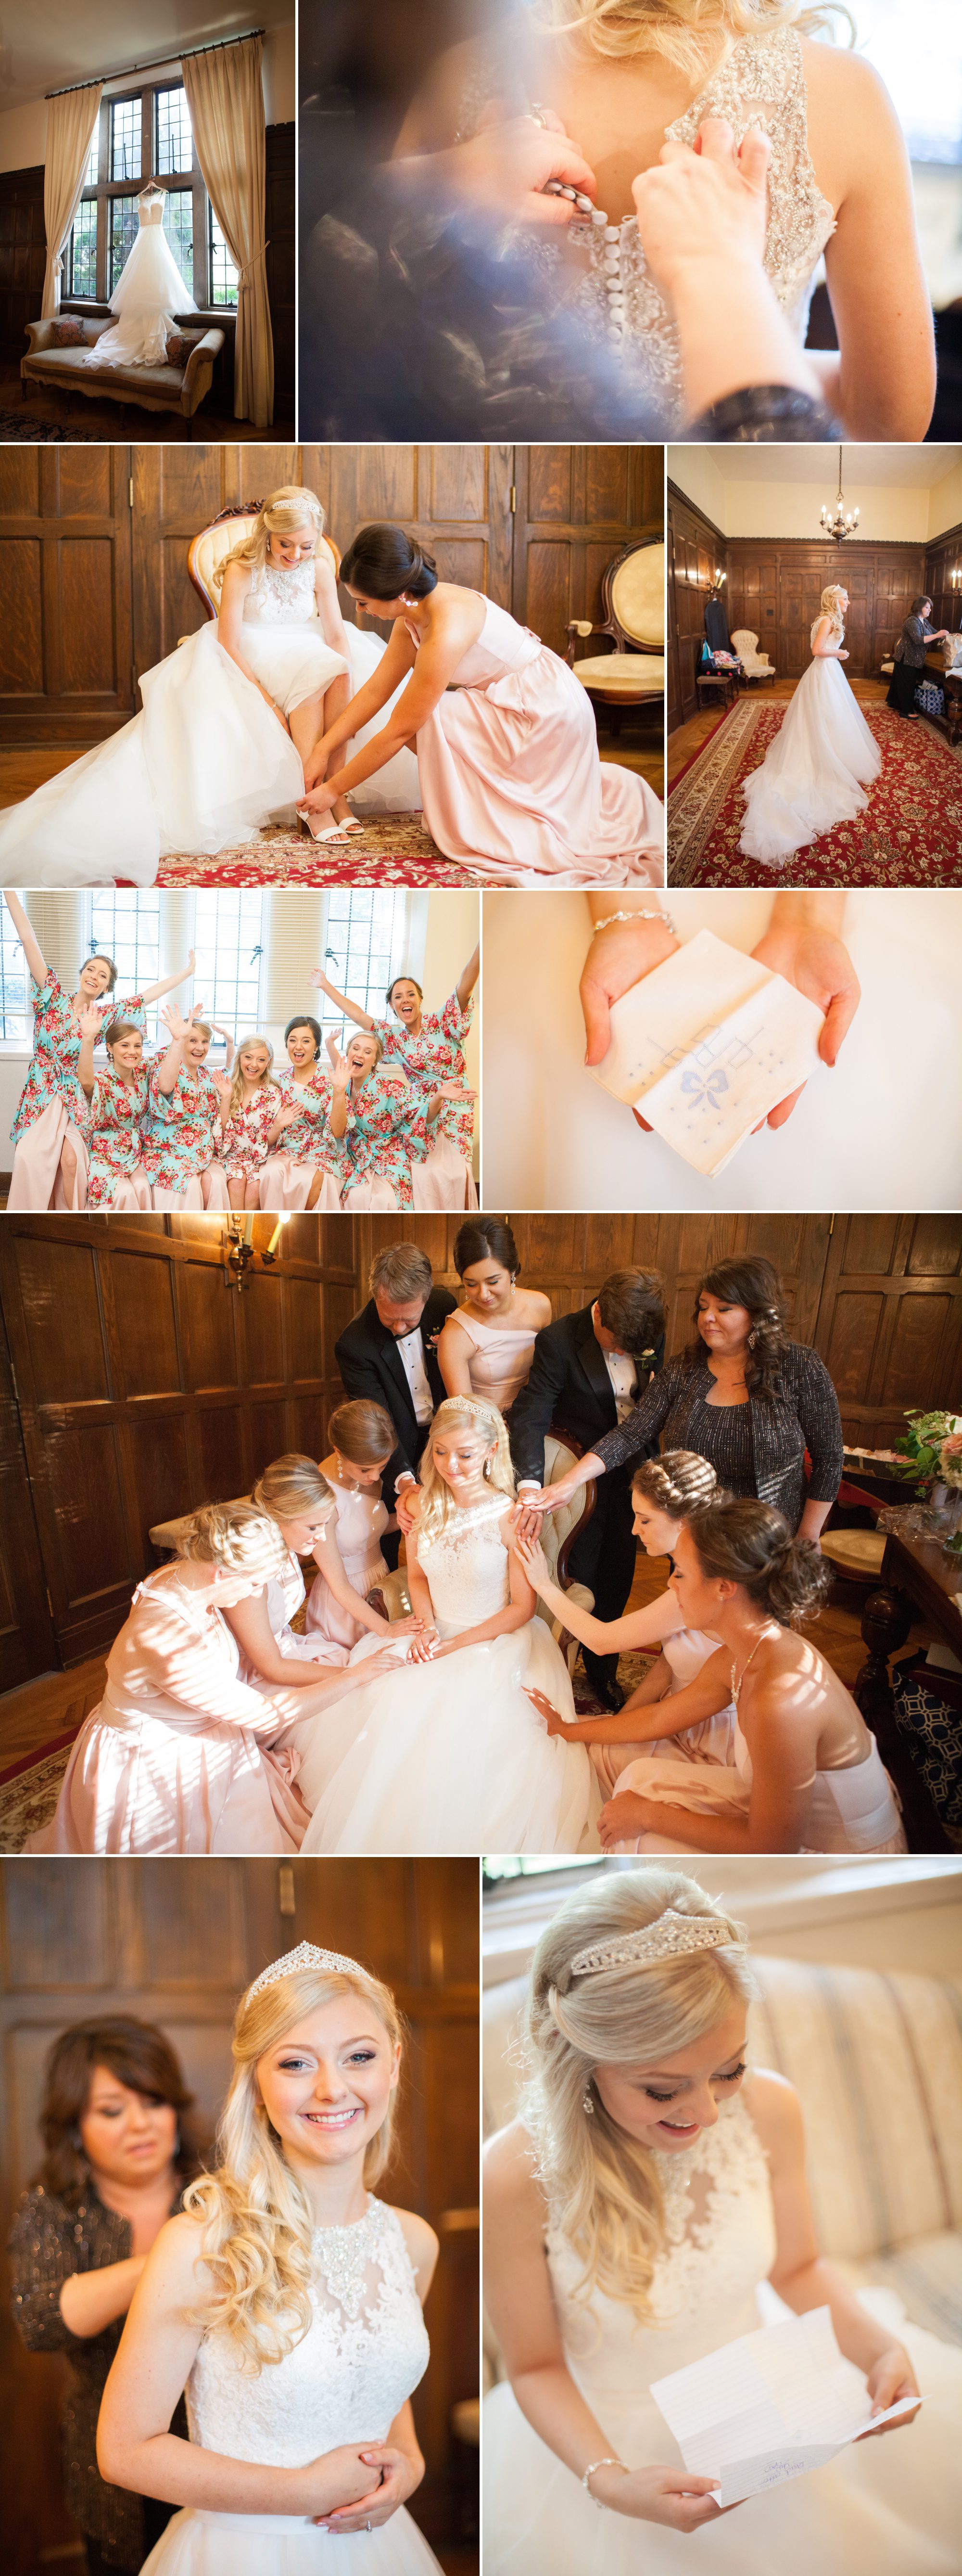 Bride gets ready with bridesmaids, wedding dress and pre ceremony prayer at Wightman Chapel at Scarritt Bennett before summer wedding ceremony in Nashville, TN. Photography by Krista Lee Photography.